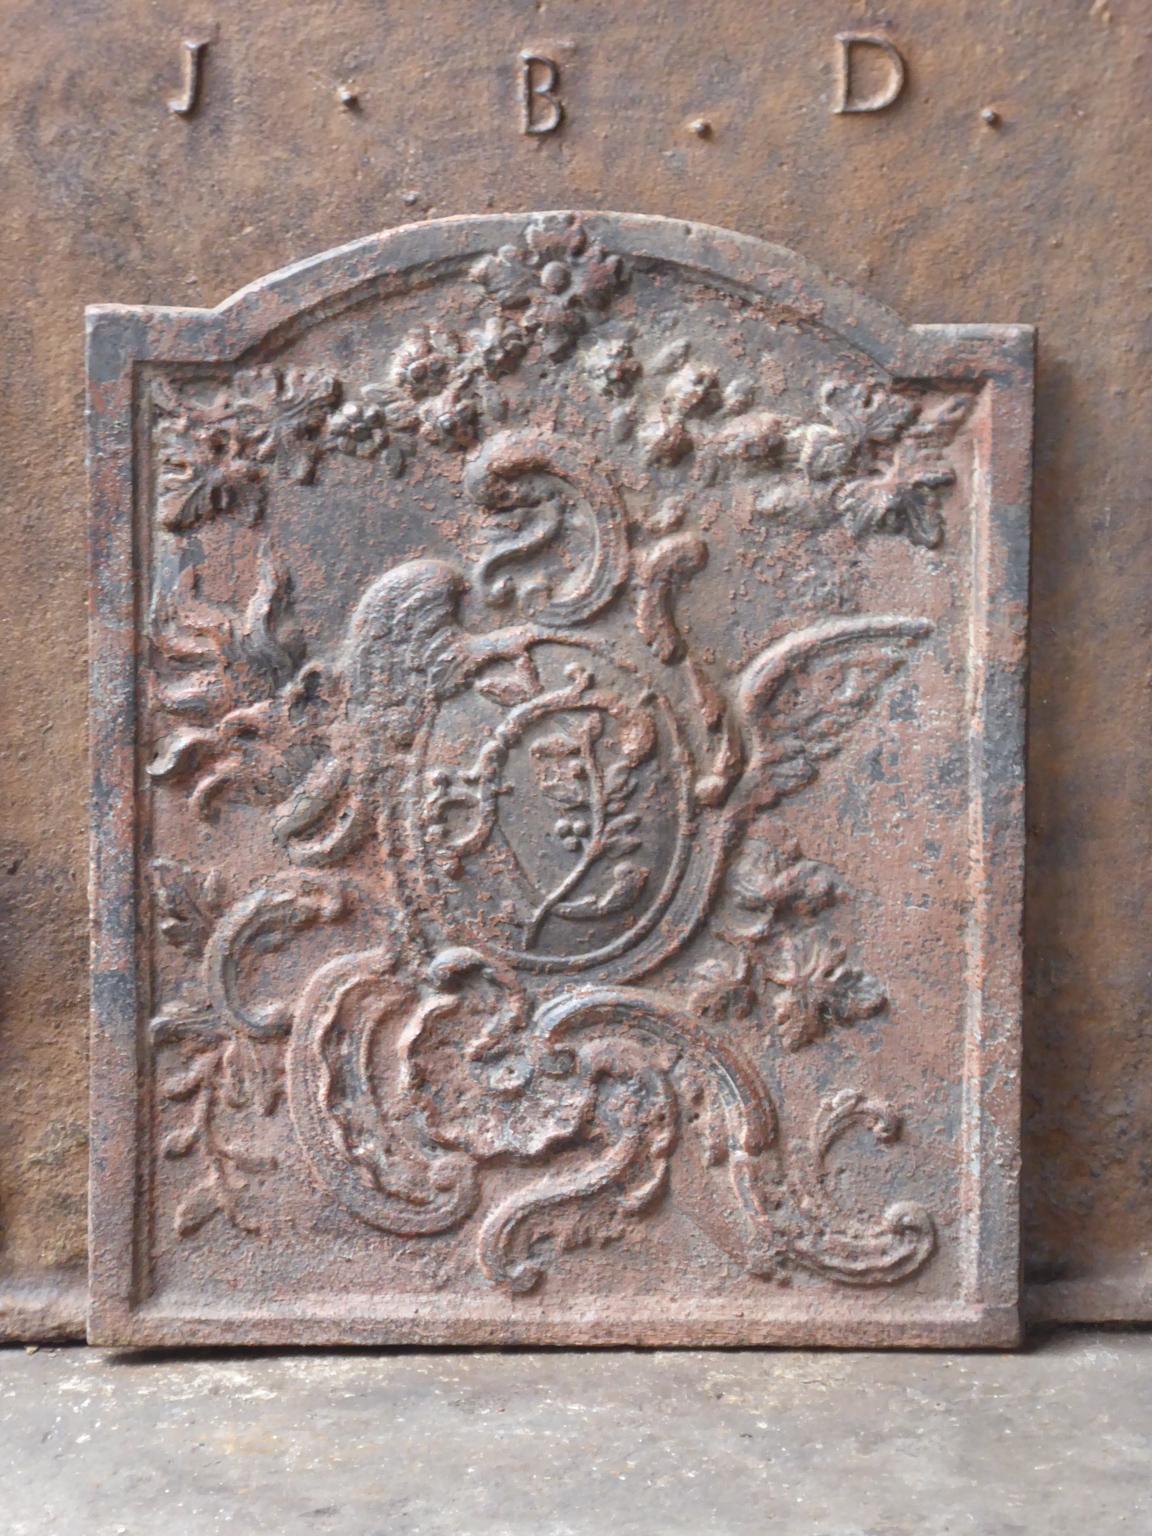 18th century French Louis XV fireback with a typical Louis XV decoration.

The fireback is made of cast iron and has a natural brown patina. Upon request it can be made black / pewter. The fireback is in a good condition and does not have